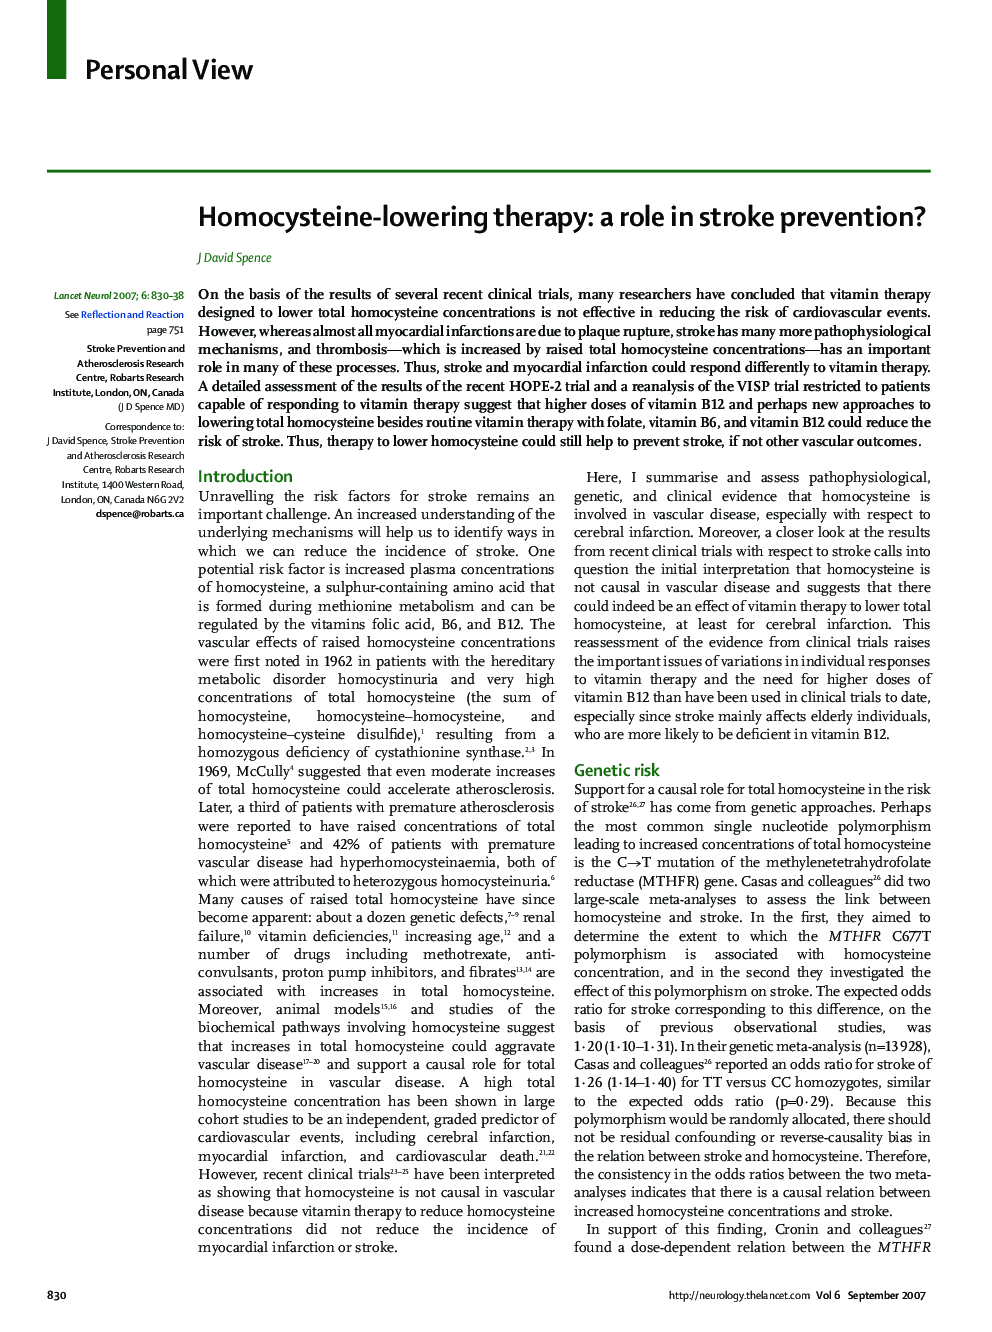 Homocysteine-lowering therapy: a role in stroke prevention?